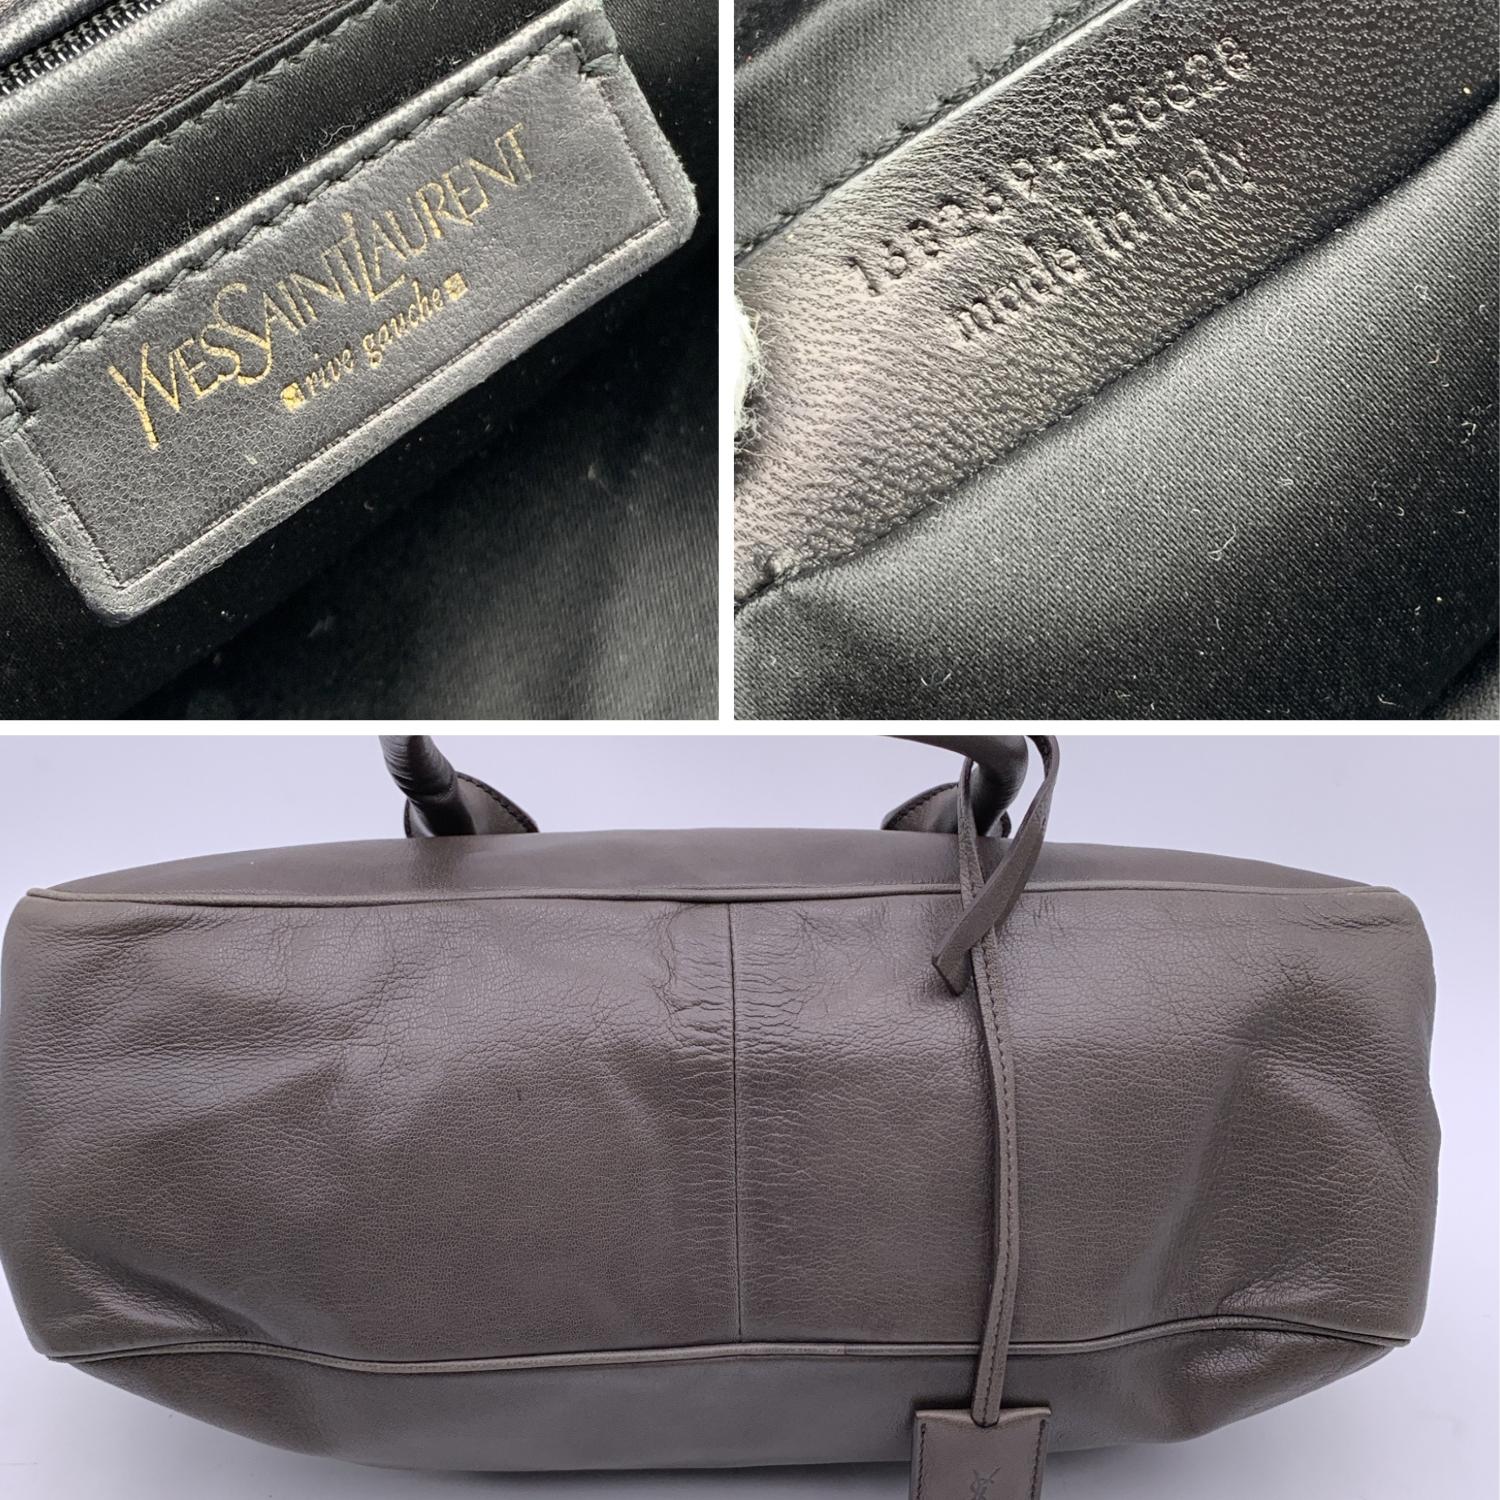 Women's Yves Saint Laurent Grey Taupe Leather Muse Bowler Satchel Bag